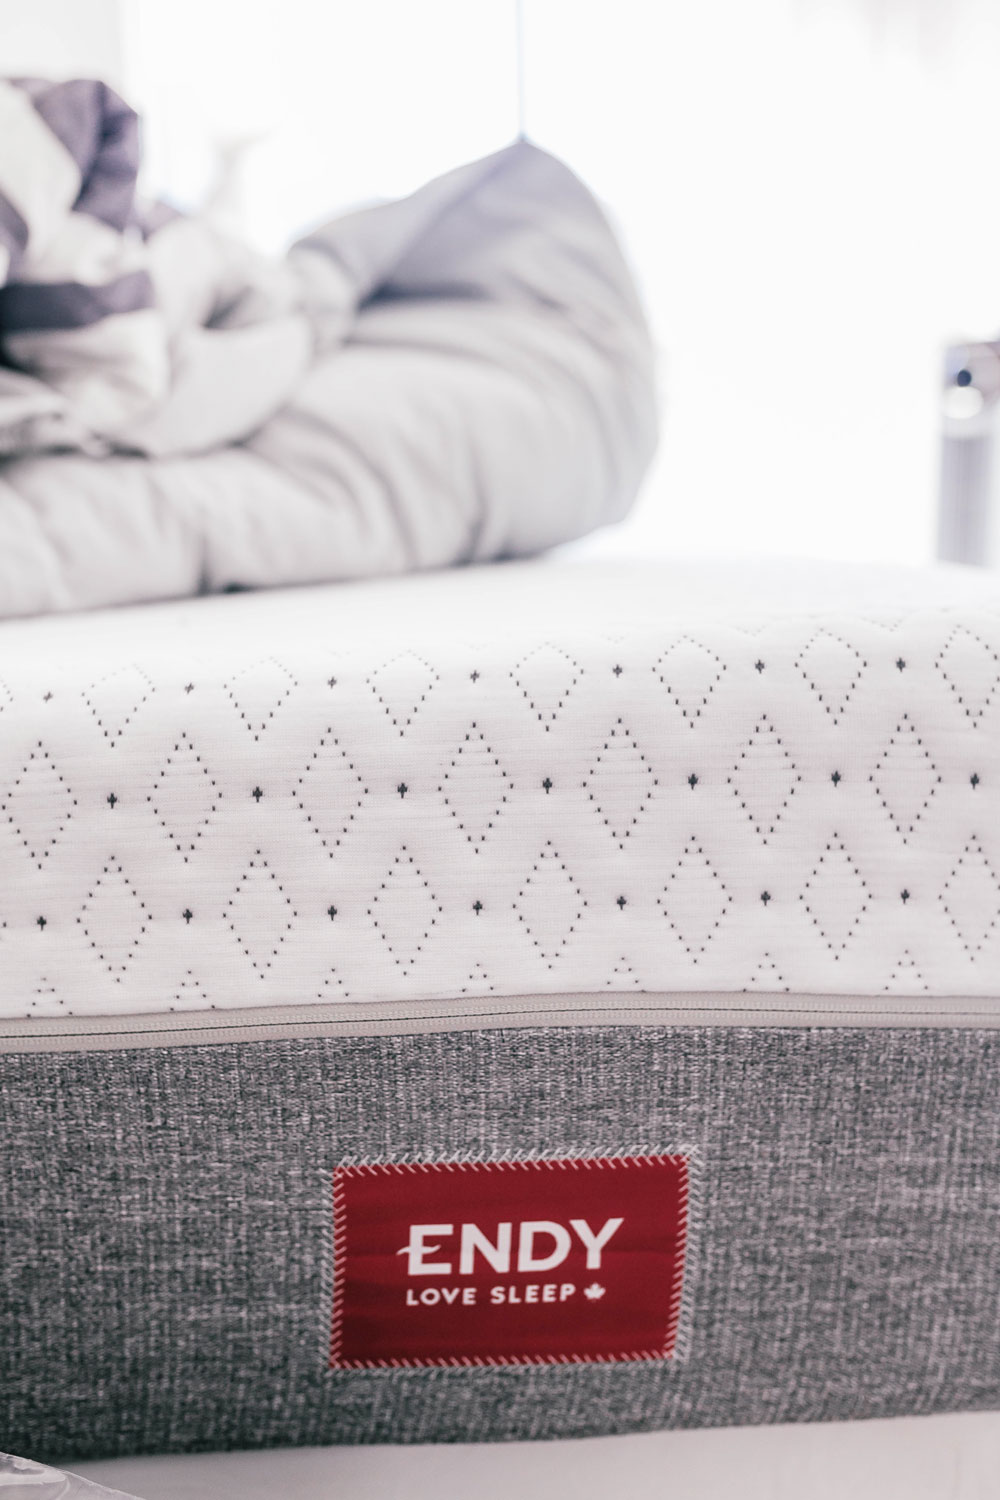 endy mattress review by To Vogue or Bust